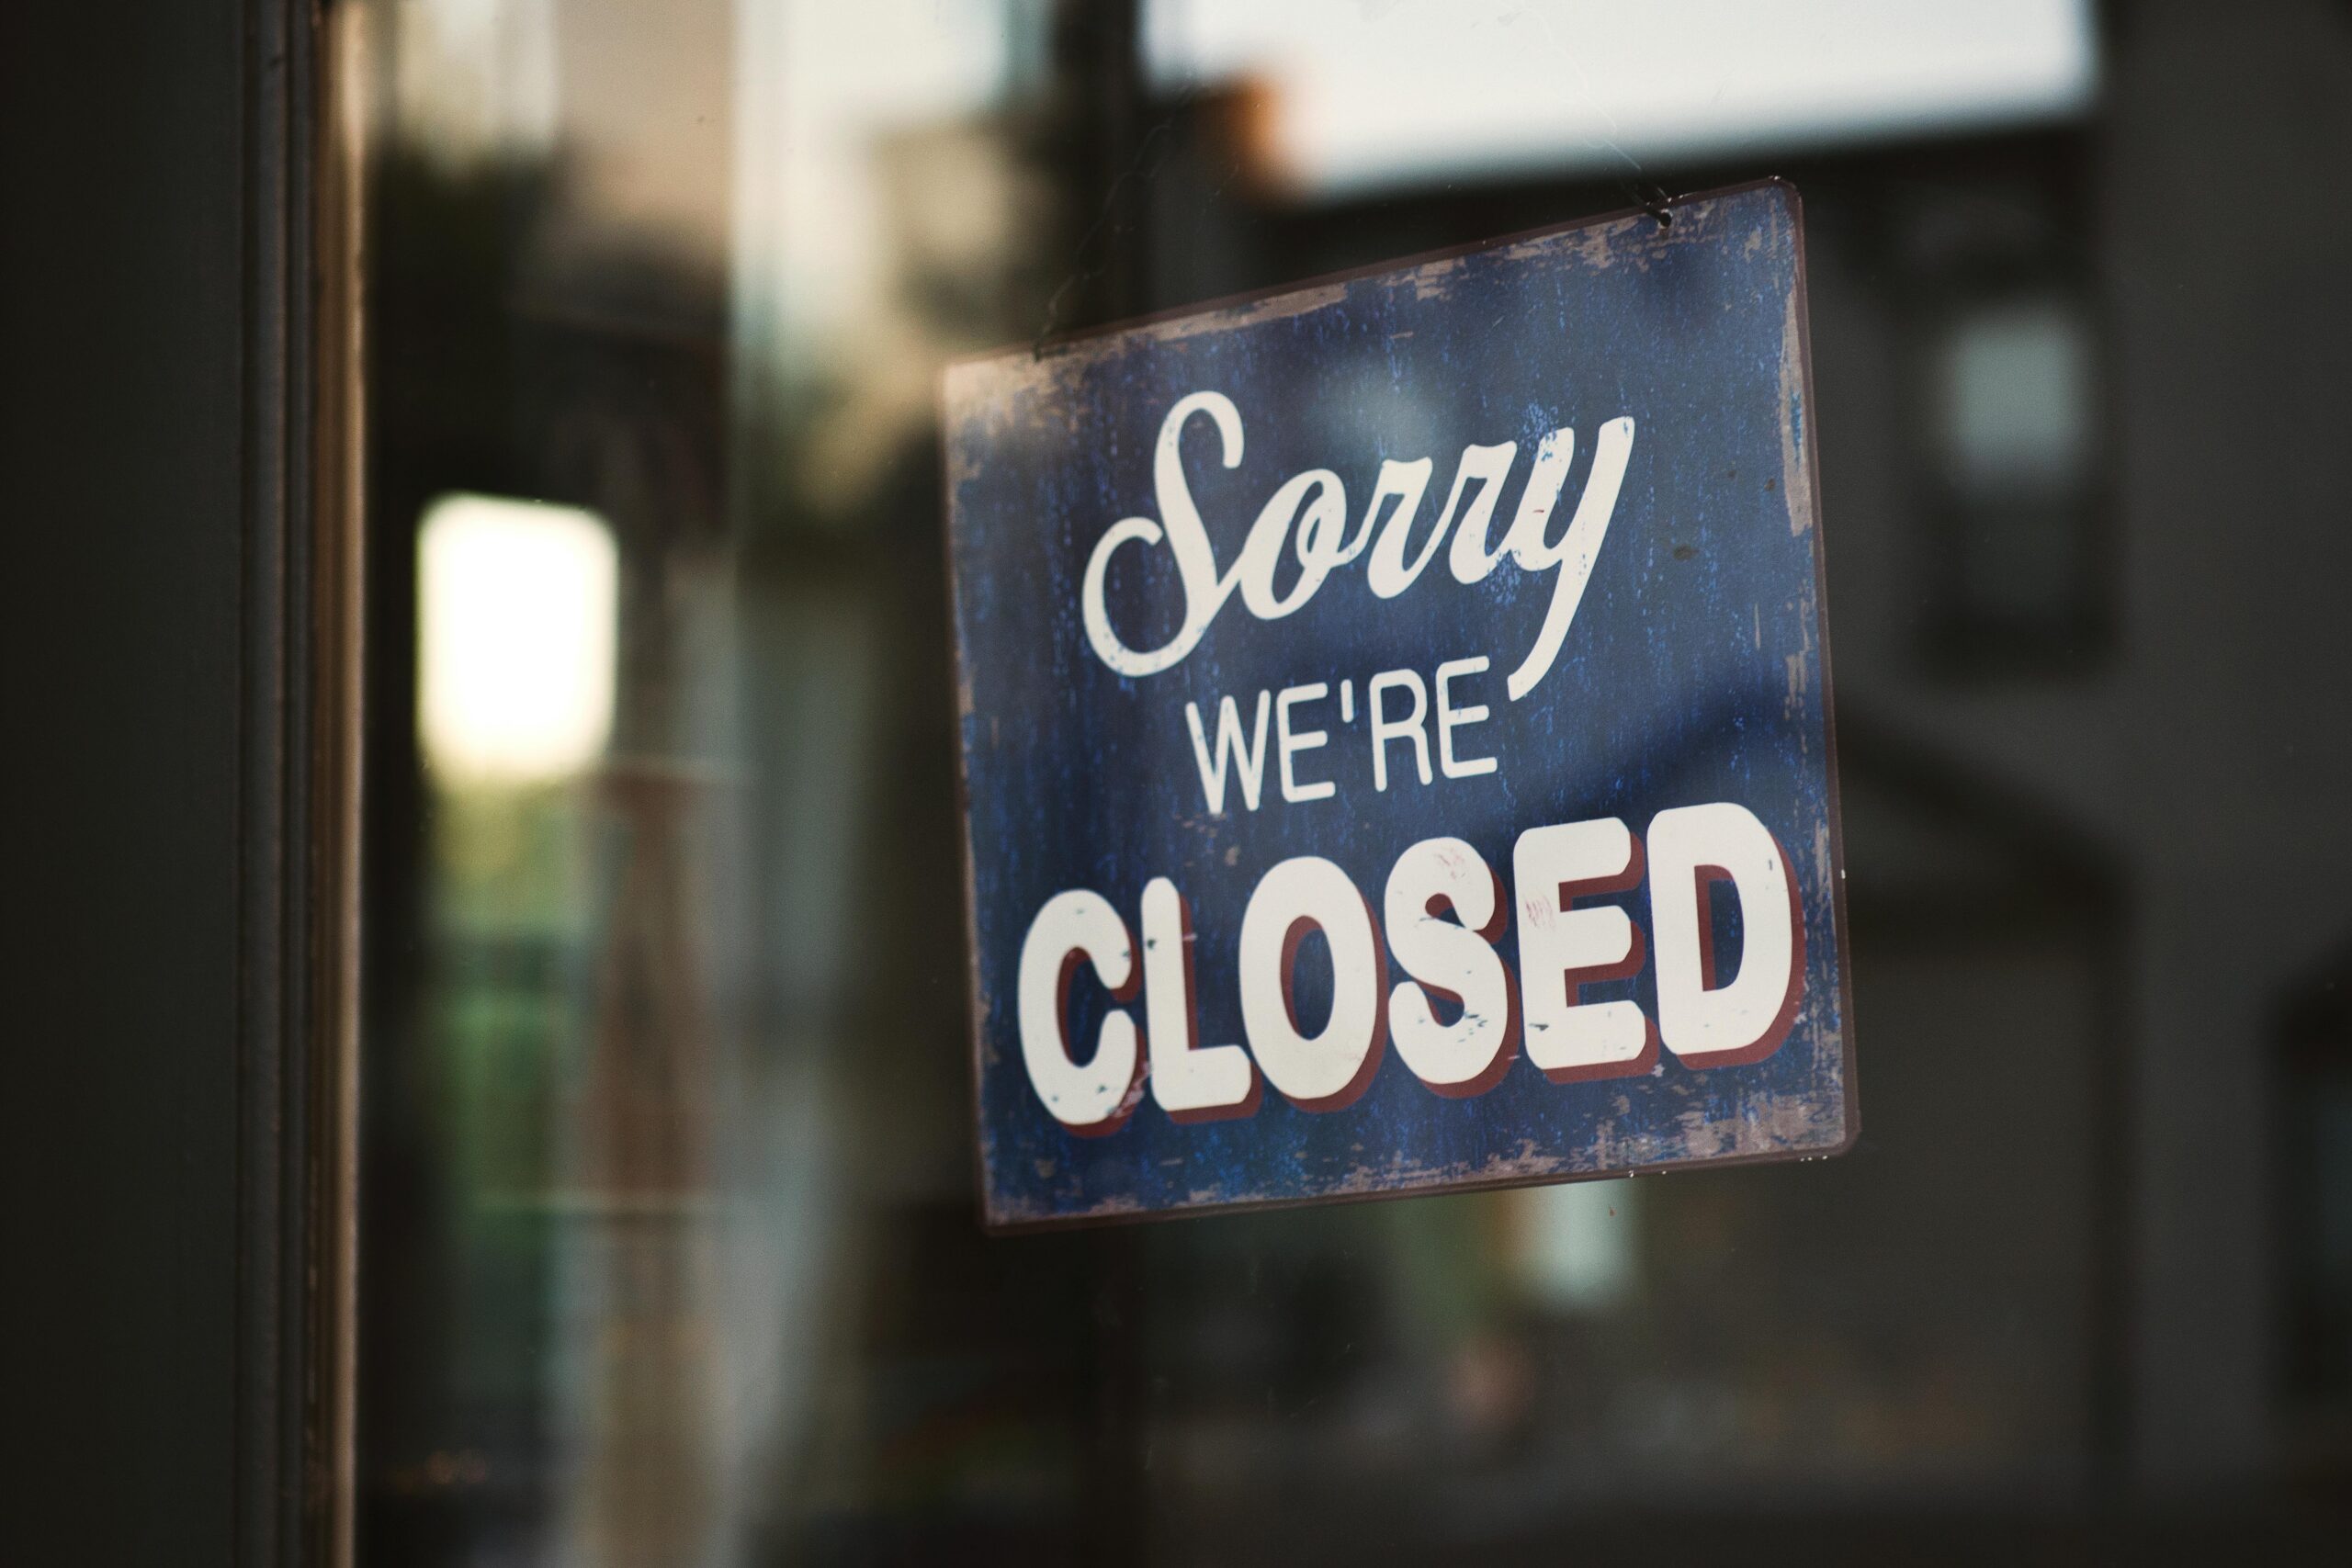 https://www.pexels.com/photo/blue-and-white-sorry-we-re-closed-wooden-signage-1171386/